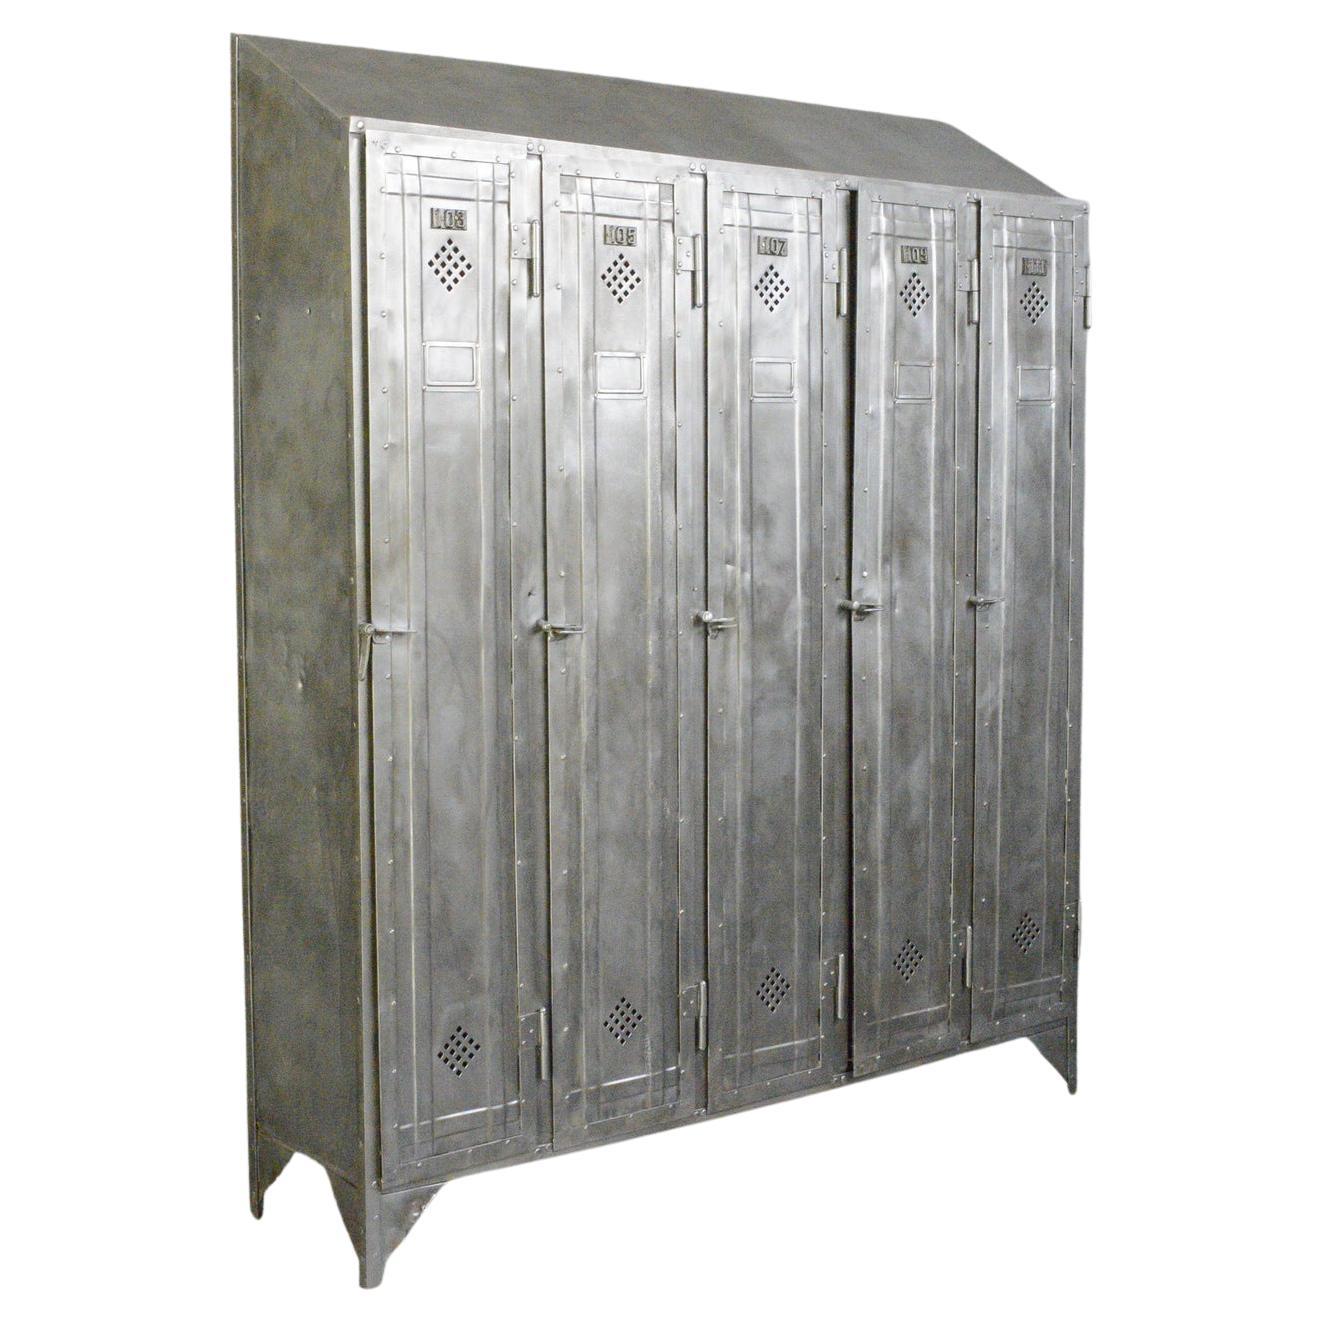 Industrial Lockers by Otto Kind circa 1920s